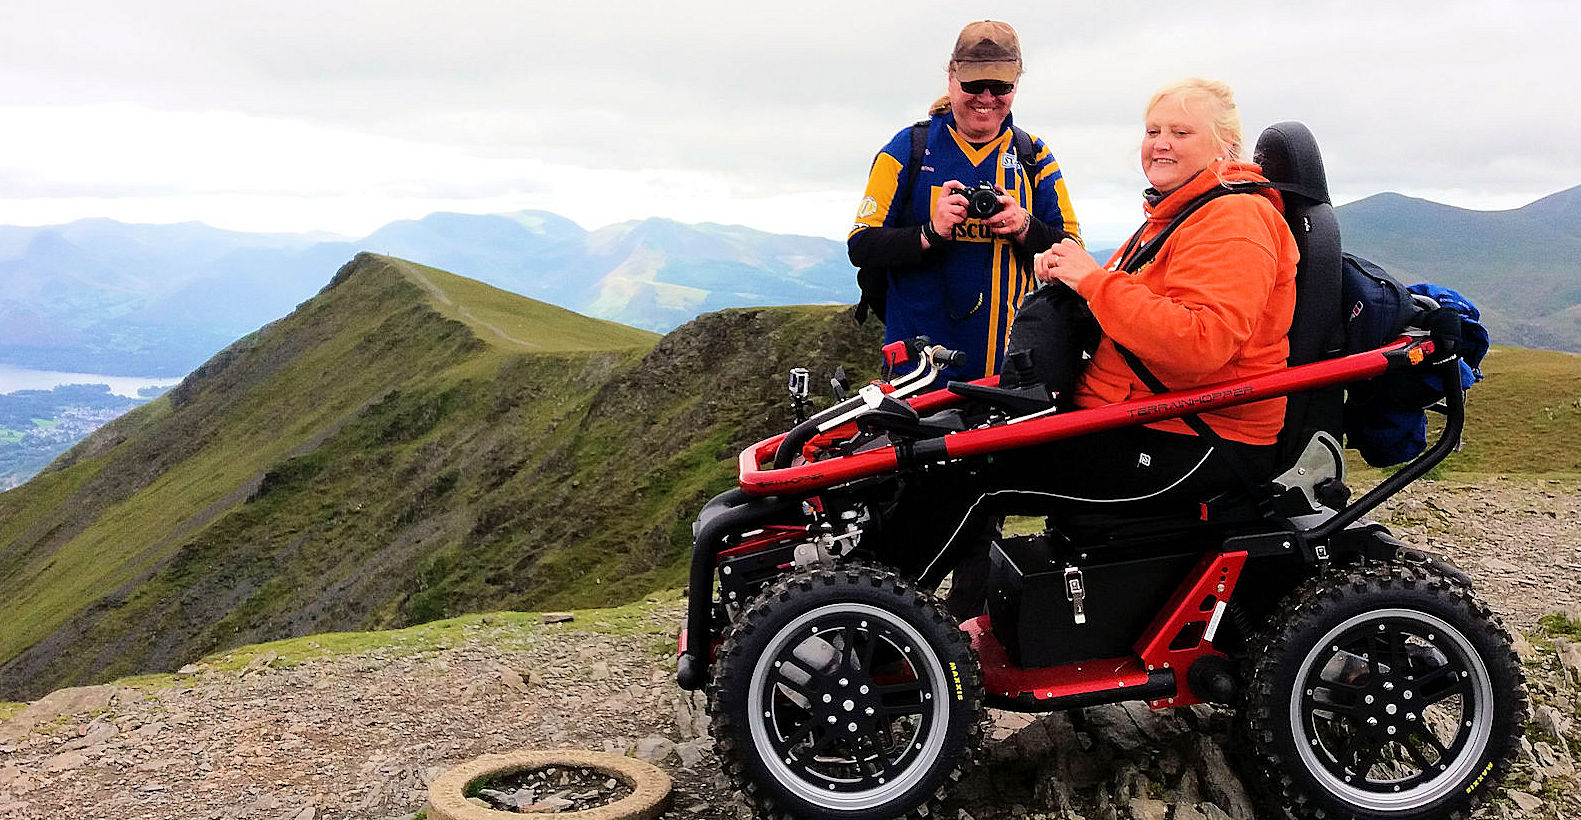 Debbie & Andy on the summit of Blencathra. Access is for all.